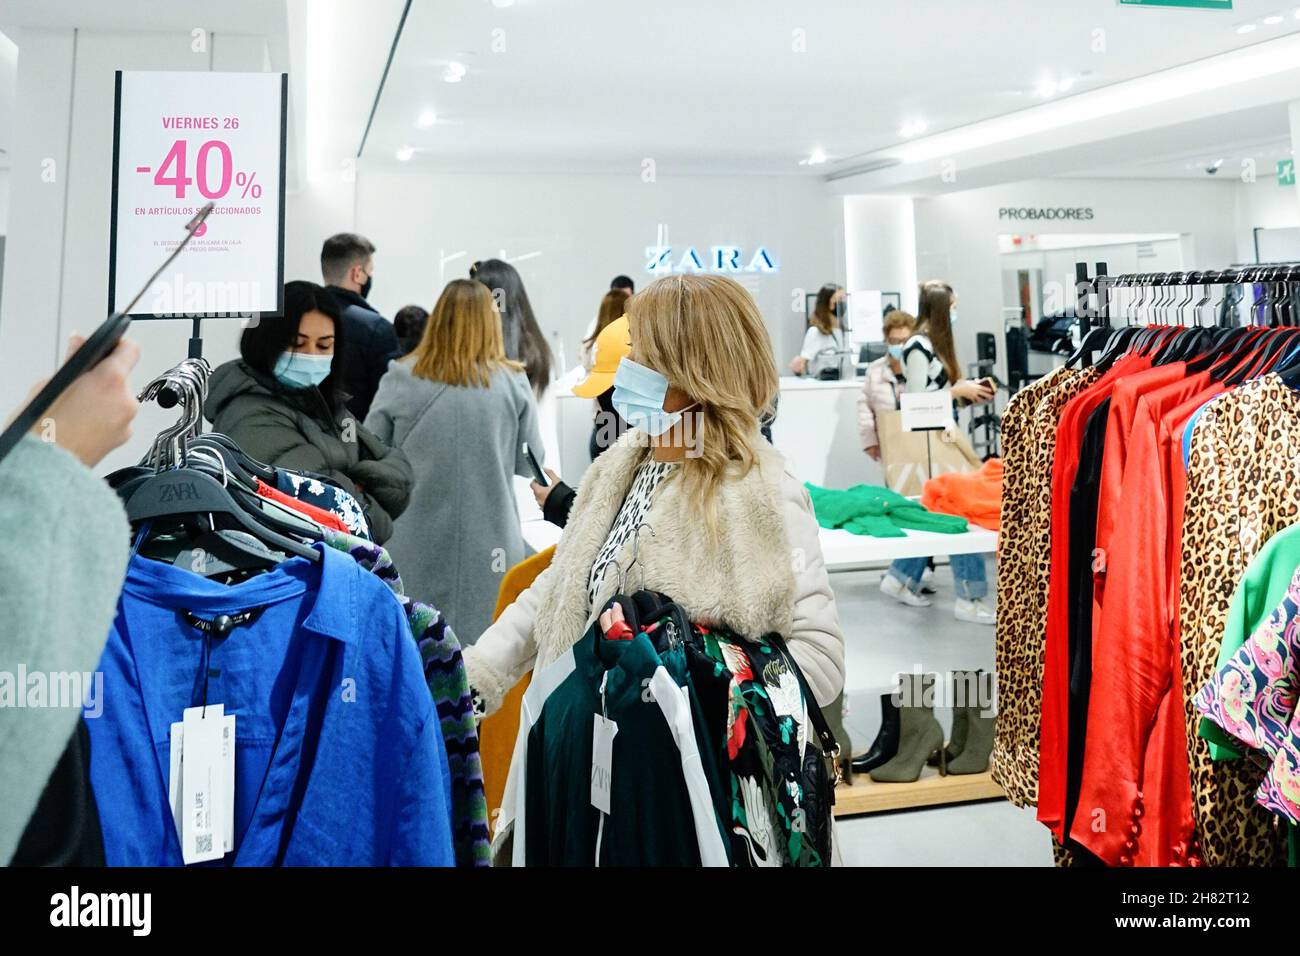 Page 12 - Black Friday Images High Resolution Stock Photography and Images  - Alamy